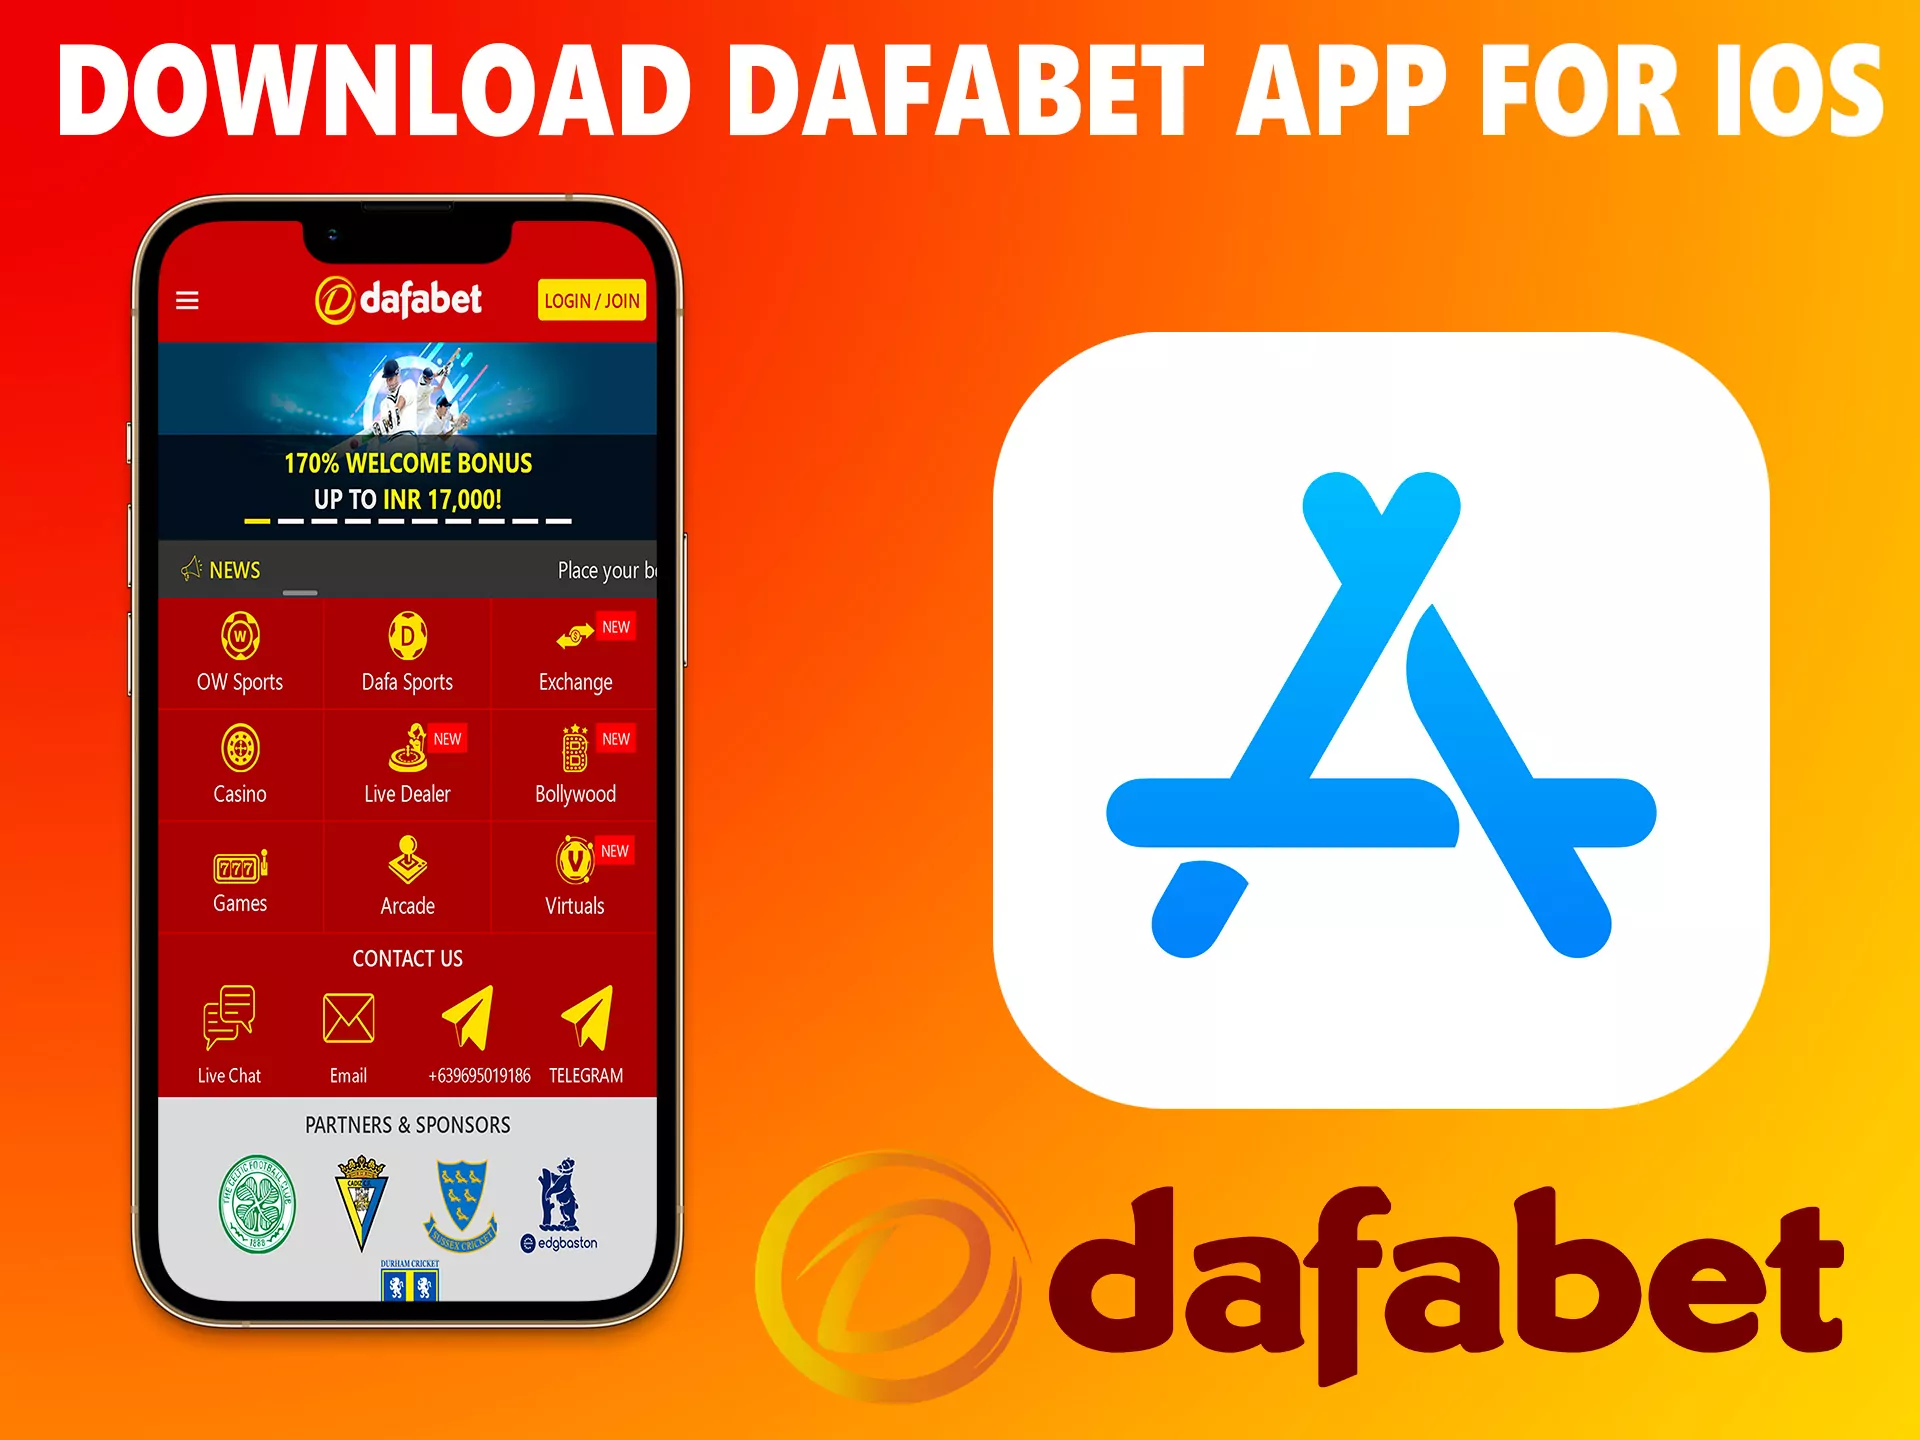 The App Store allows you to download the Dafabet application to your Apple gadget, it is easier to get it here.